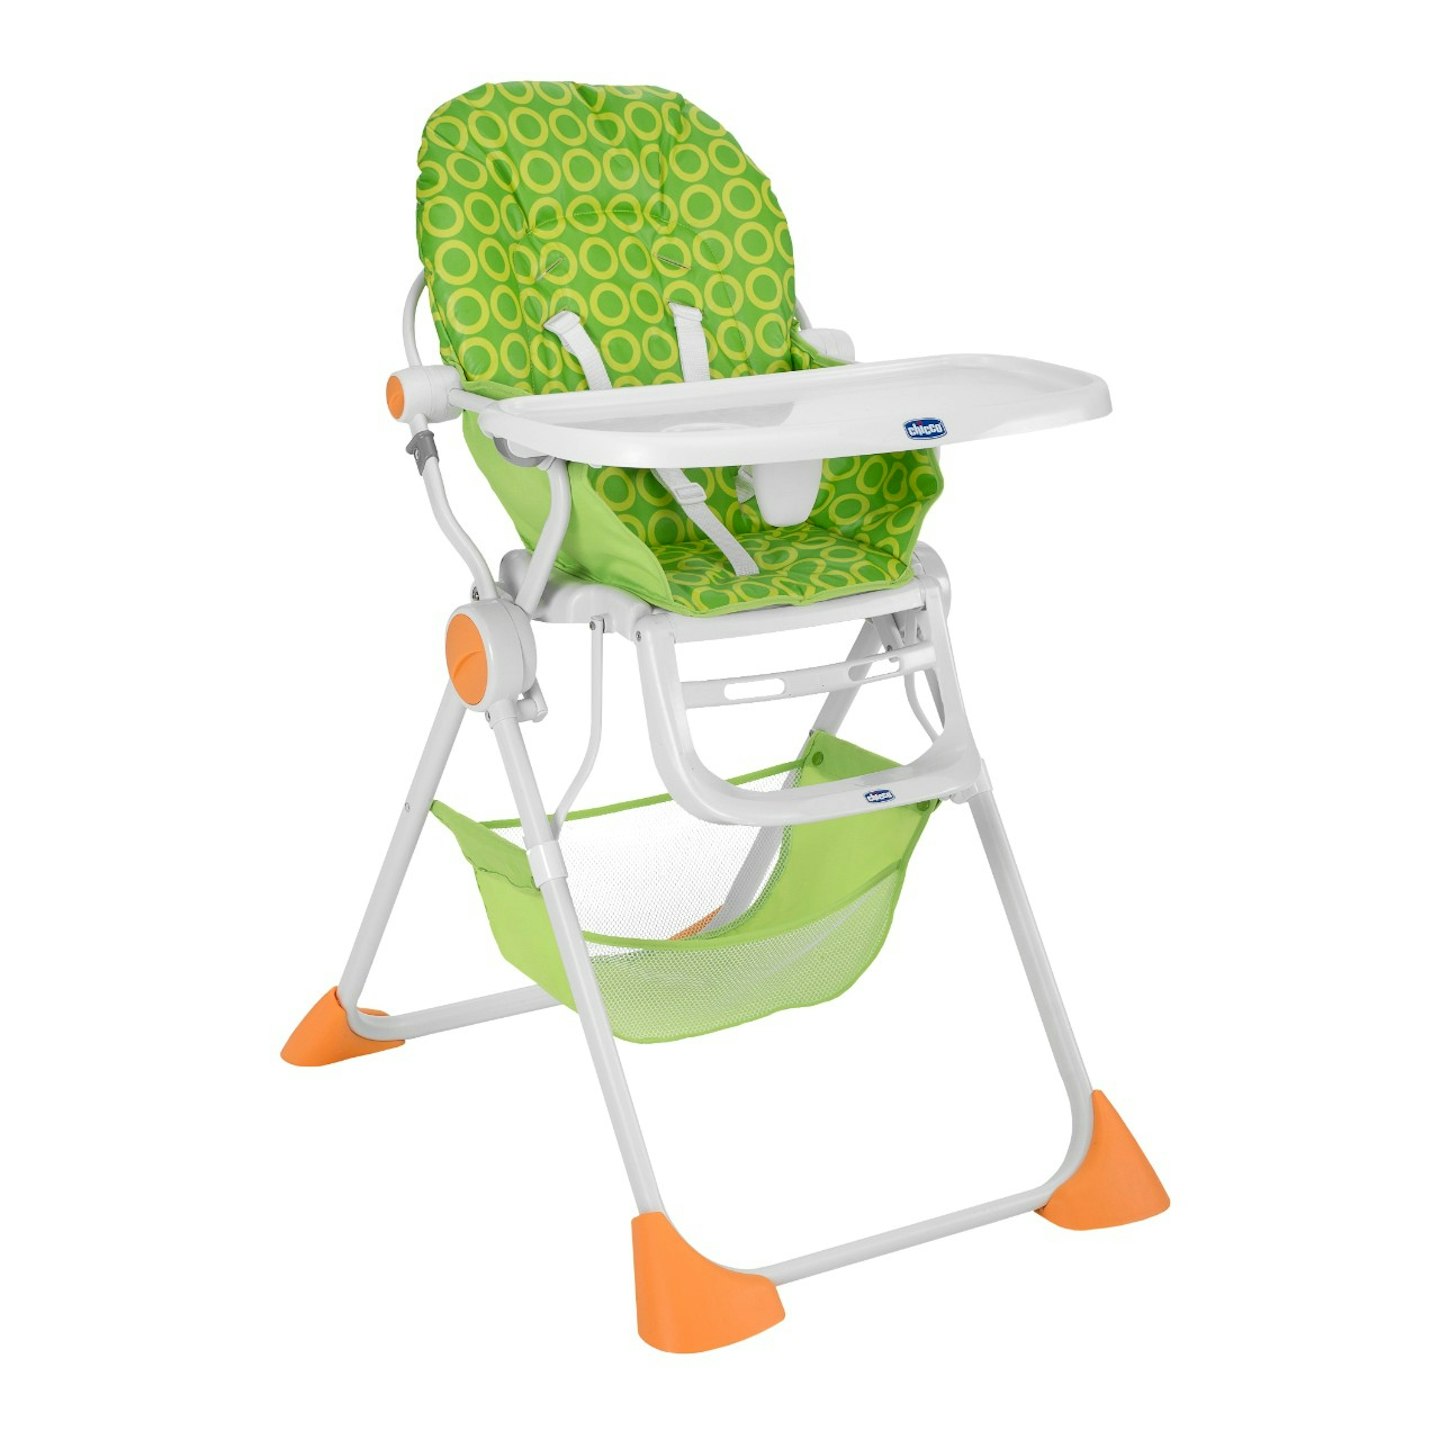 https://images.bauerhosting.com/affiliates/sites/12/motherandbaby/legacy/root/chicco-pocket-lunch-highchair.jpeg?ar=16%3A9&fit=crop&crop=top&auto=format&w=1440&q=80